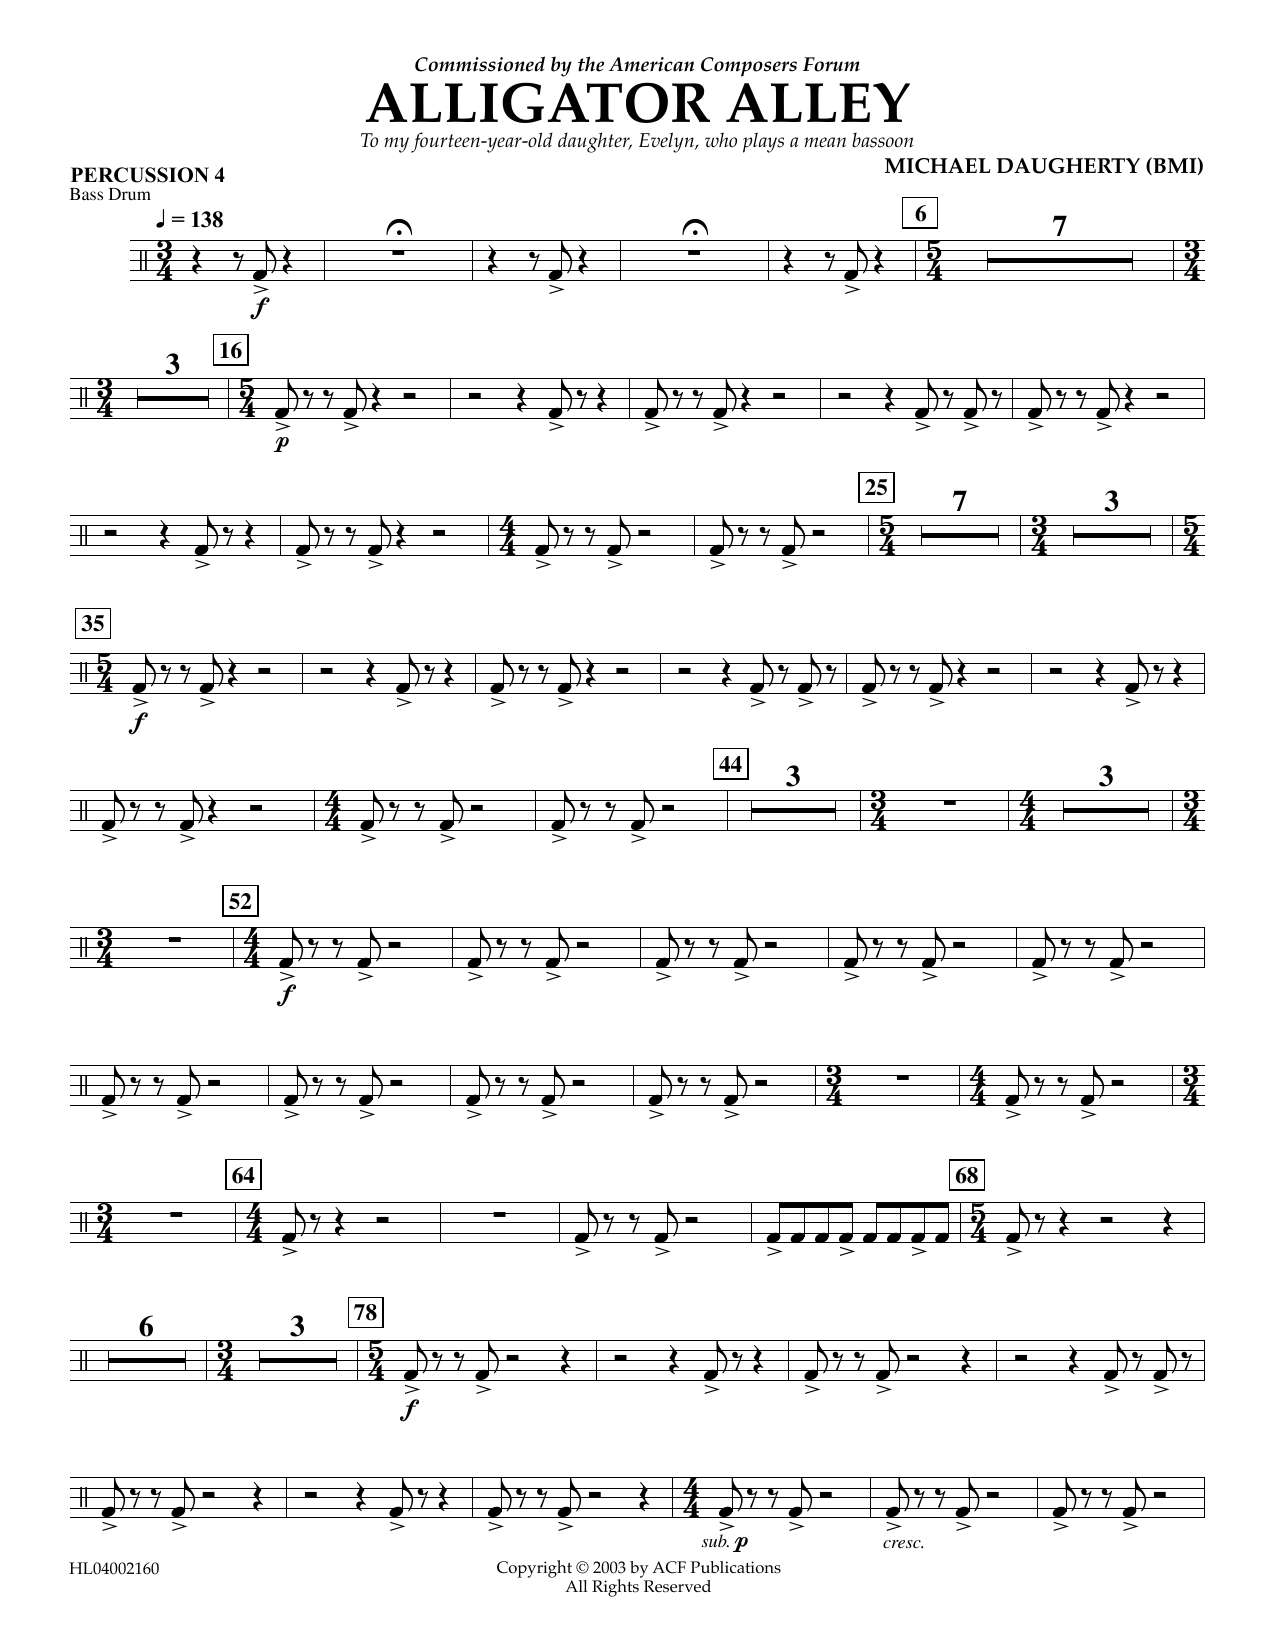 Download Michael Daugherty Alligator Alley - Percussion 4 Sheet Music